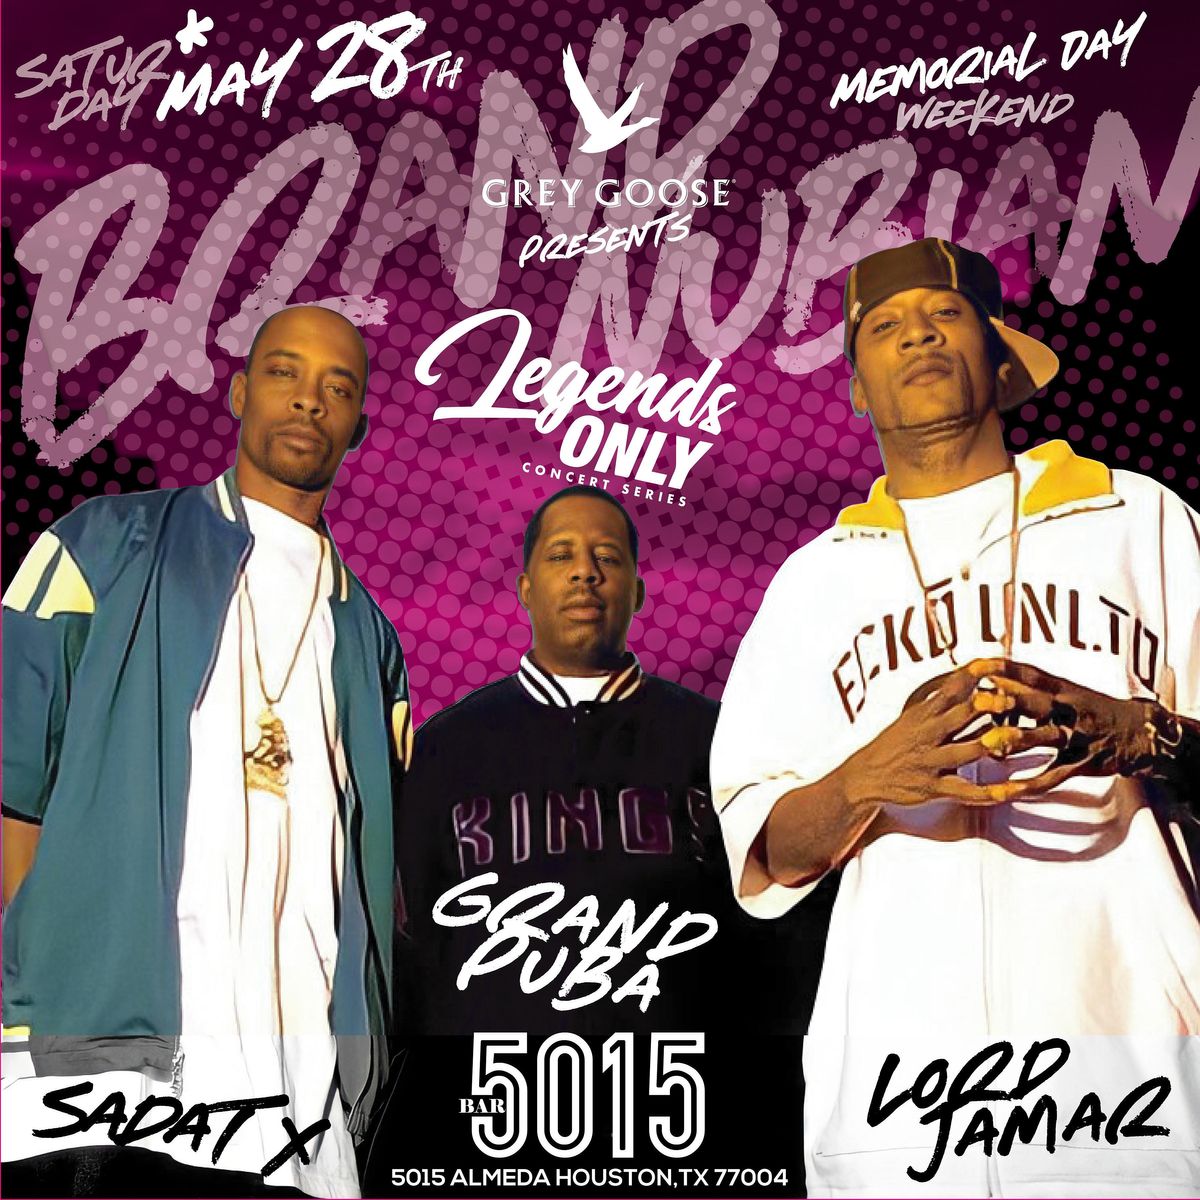 Legends Only Series w\/ BRAND NUBIAN Live TasteMakers Day Party Sat May 28th